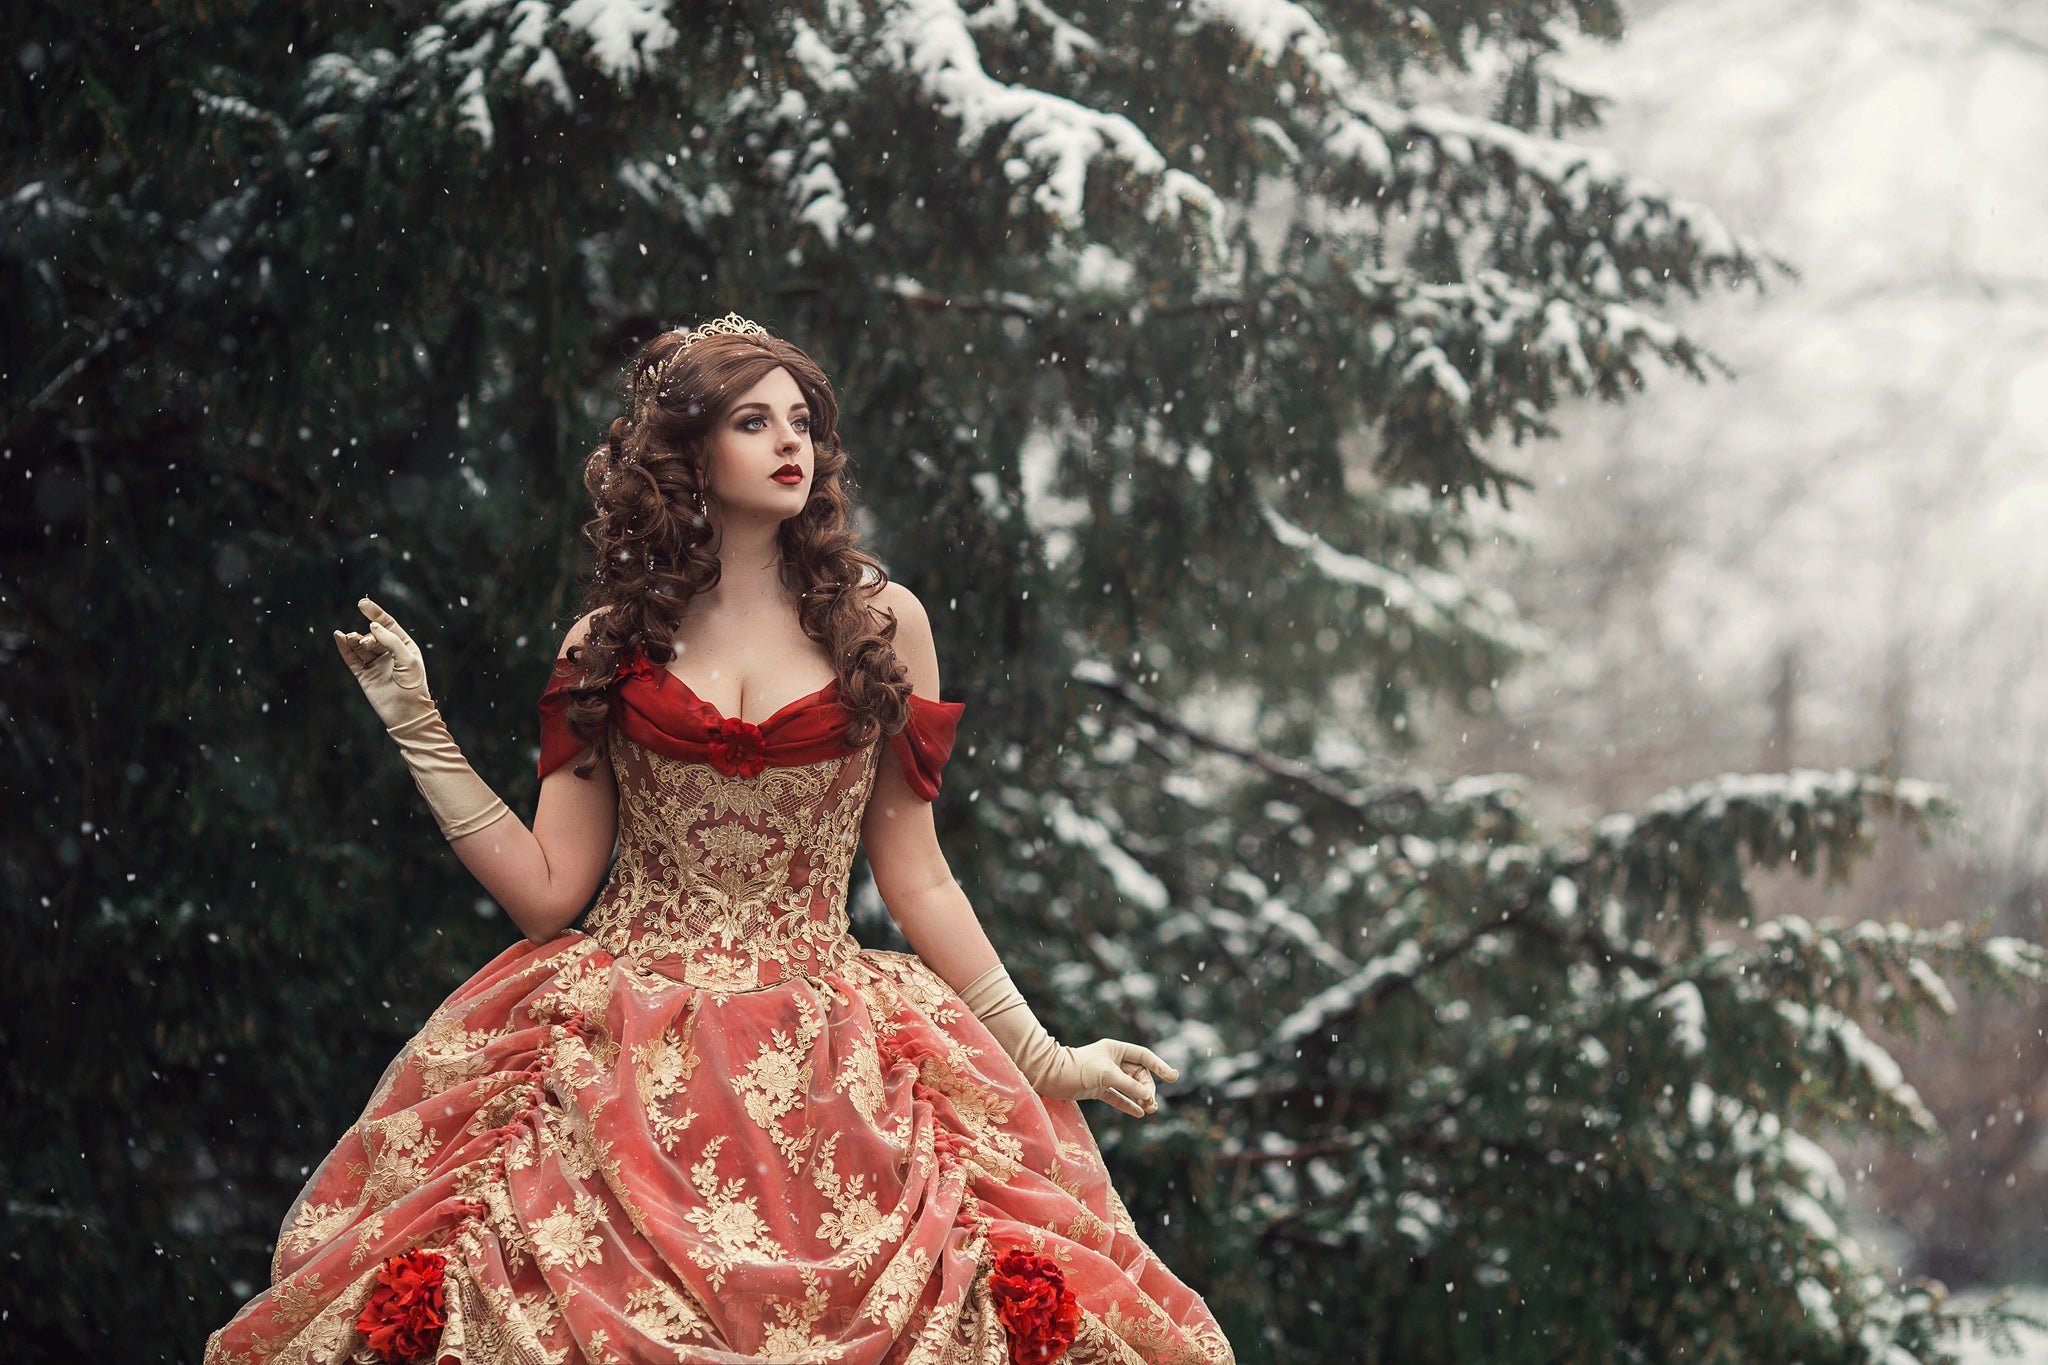 Red/Gold Upscale Fantasy Belle Gown with Flowers